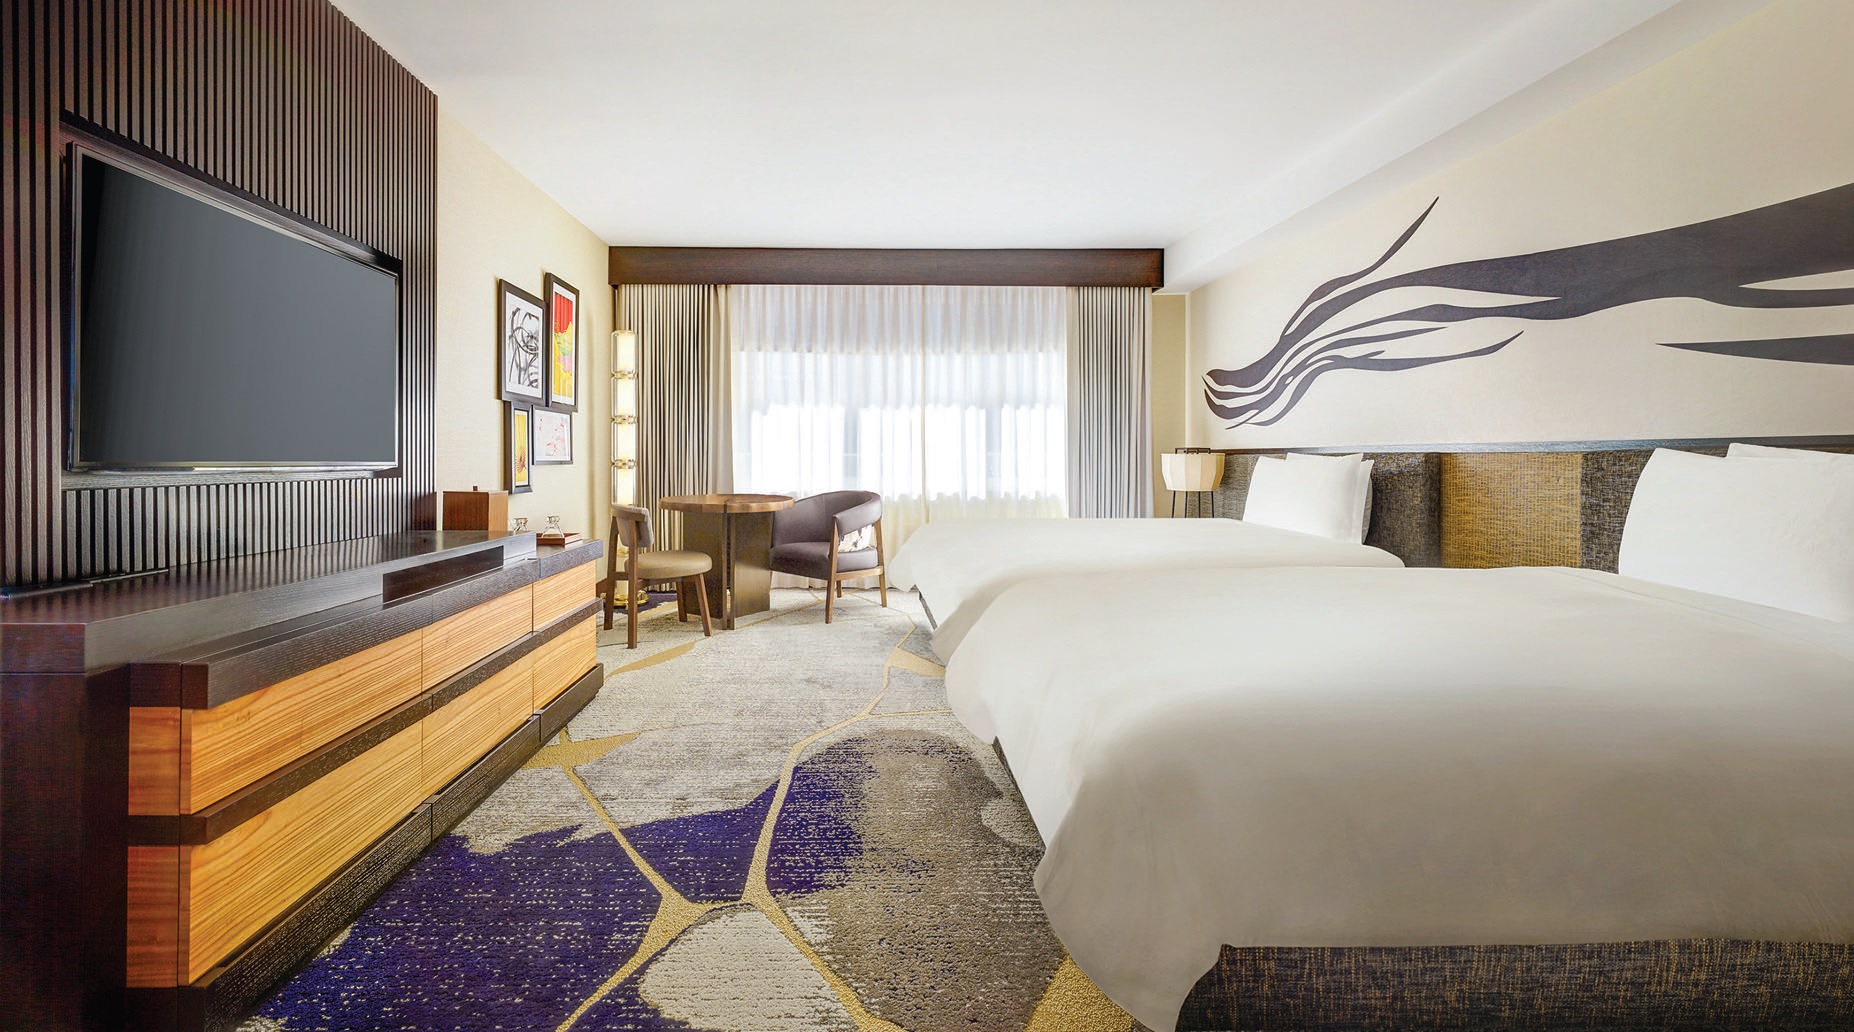 Nobu Hotel Las Vegas at Caesars Palace, which recently revamped its swanky guest rooms, welcomes furry friends to its luxe accommodations. PHOTO: BY BARBARA KRAFT